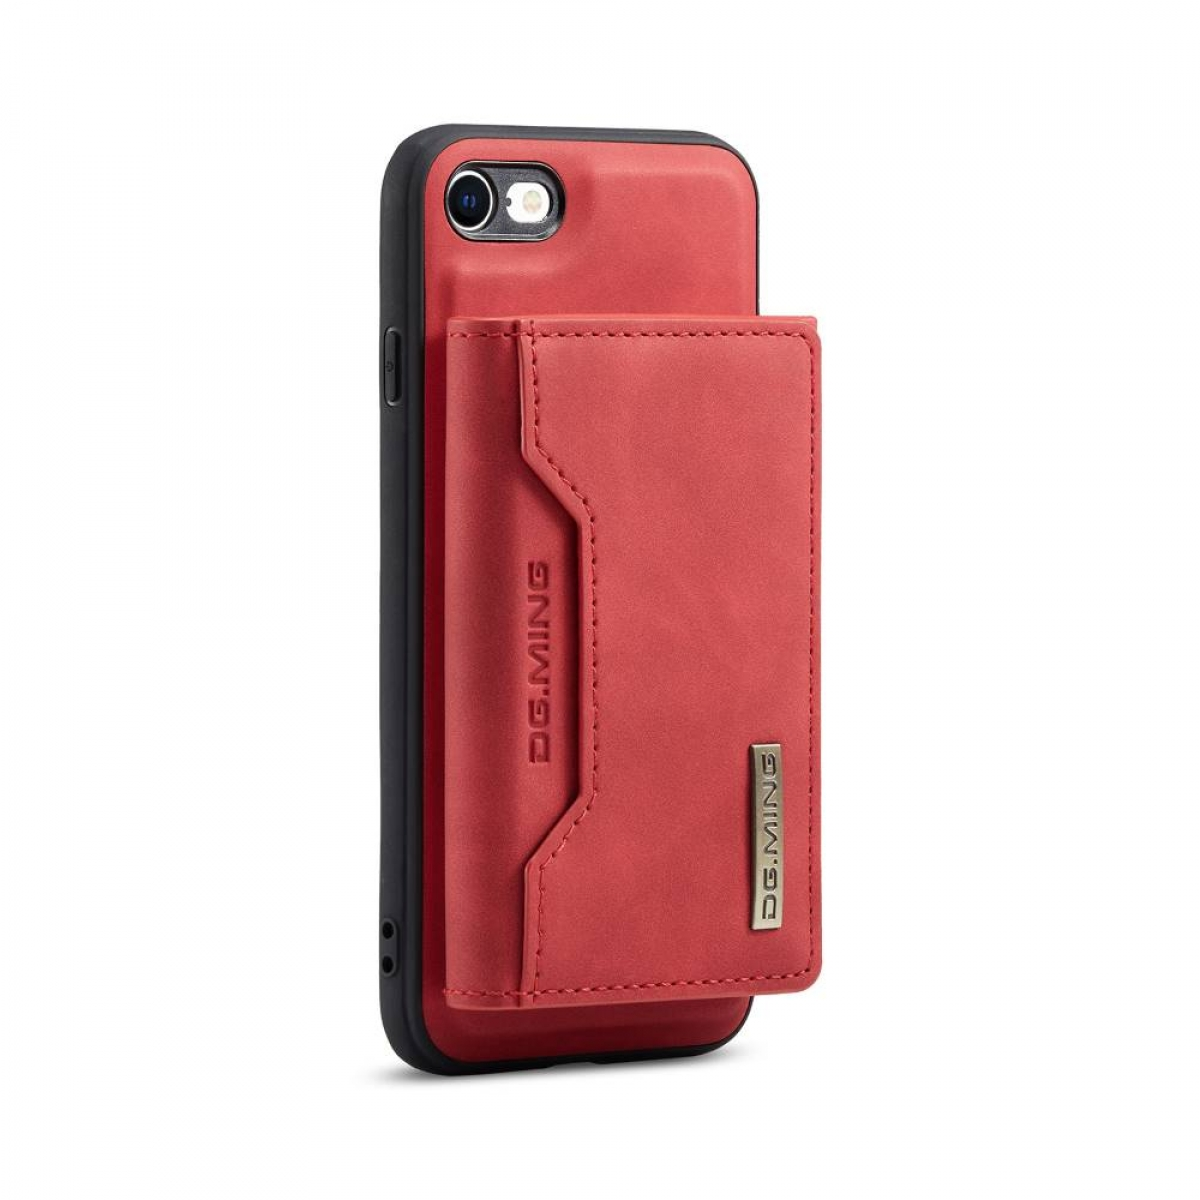 M2 DG iPhone 2in1, Backcover, Rot Apple, MING 8,